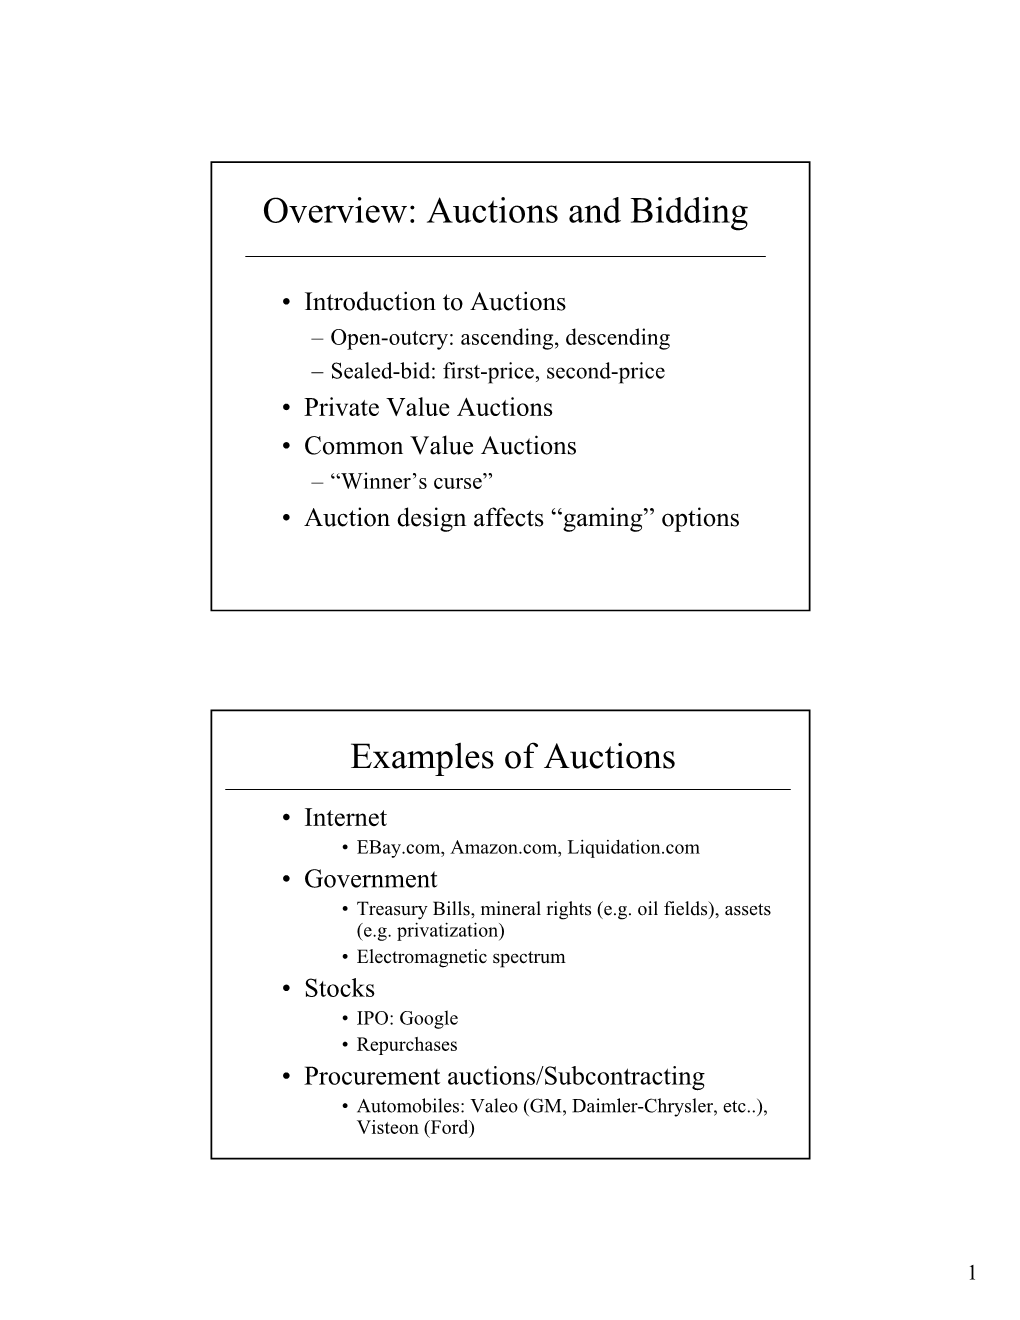 Overview: Auctions and Bidding Examples of Auctions